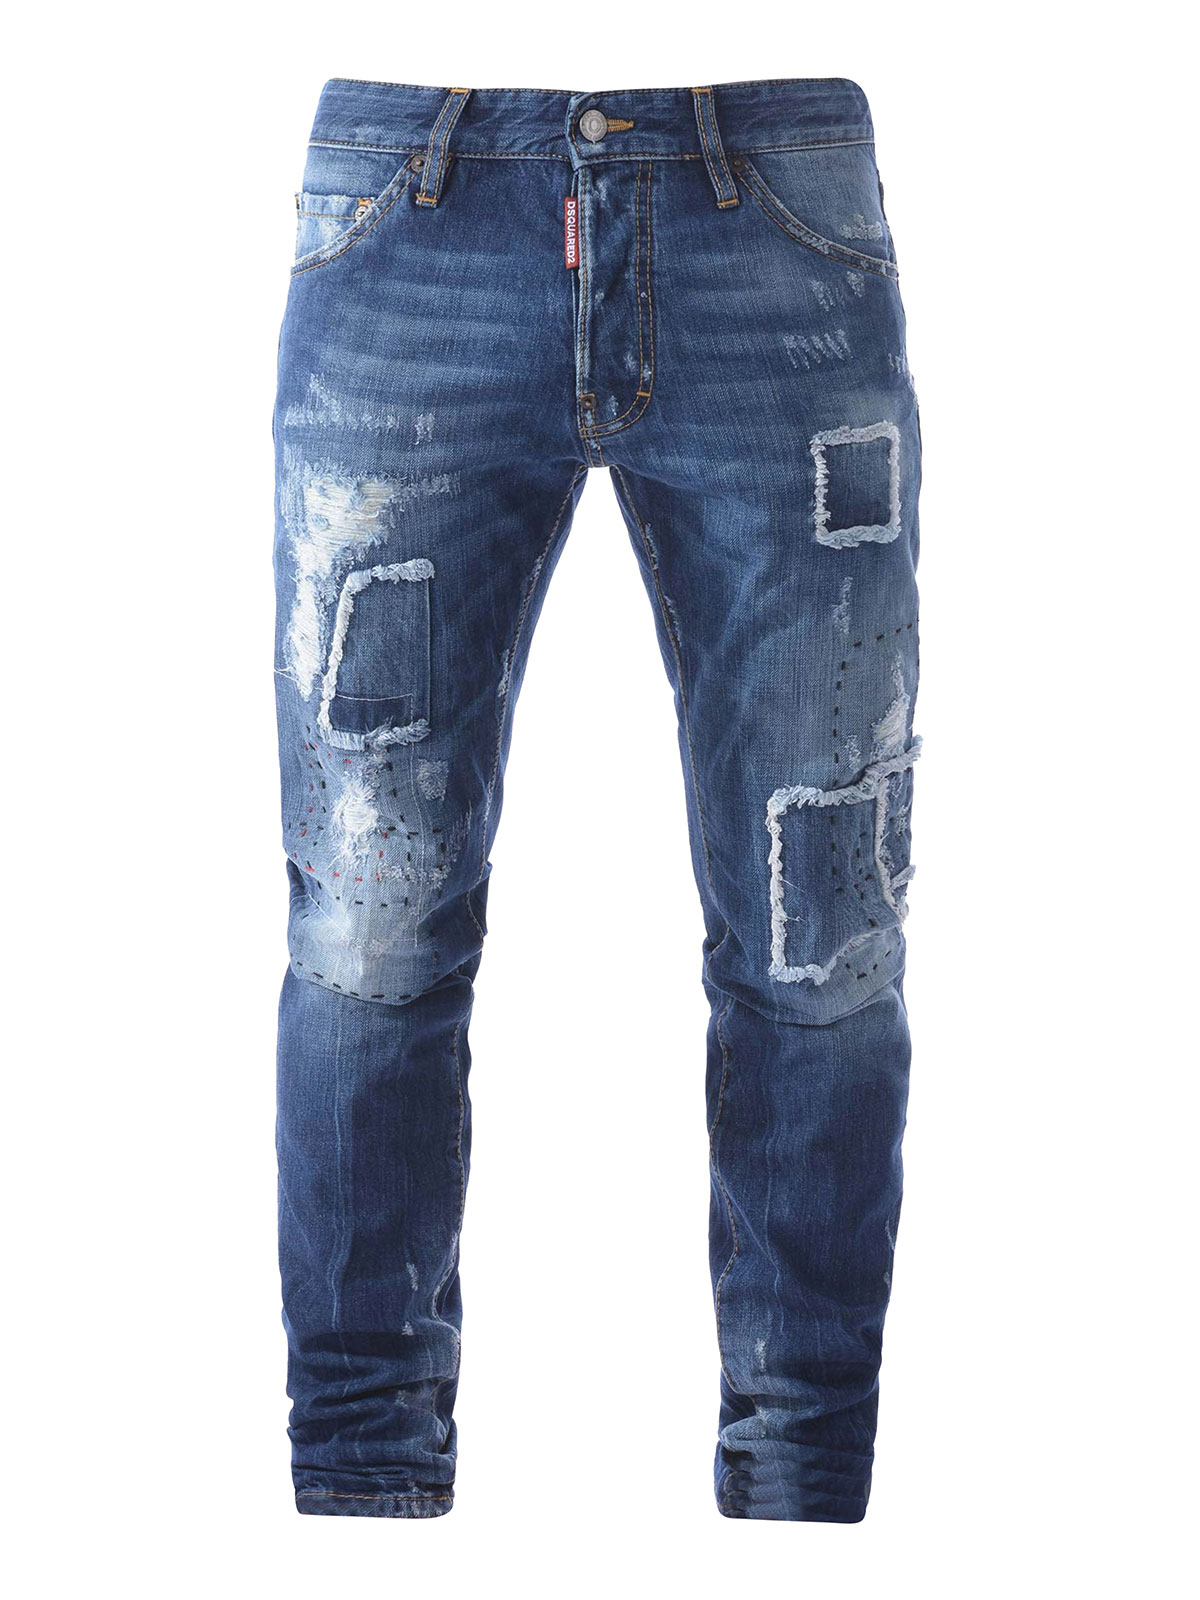 Straight leg jeans Dsquared2 - Cool Guy patched worn looking jeans ...